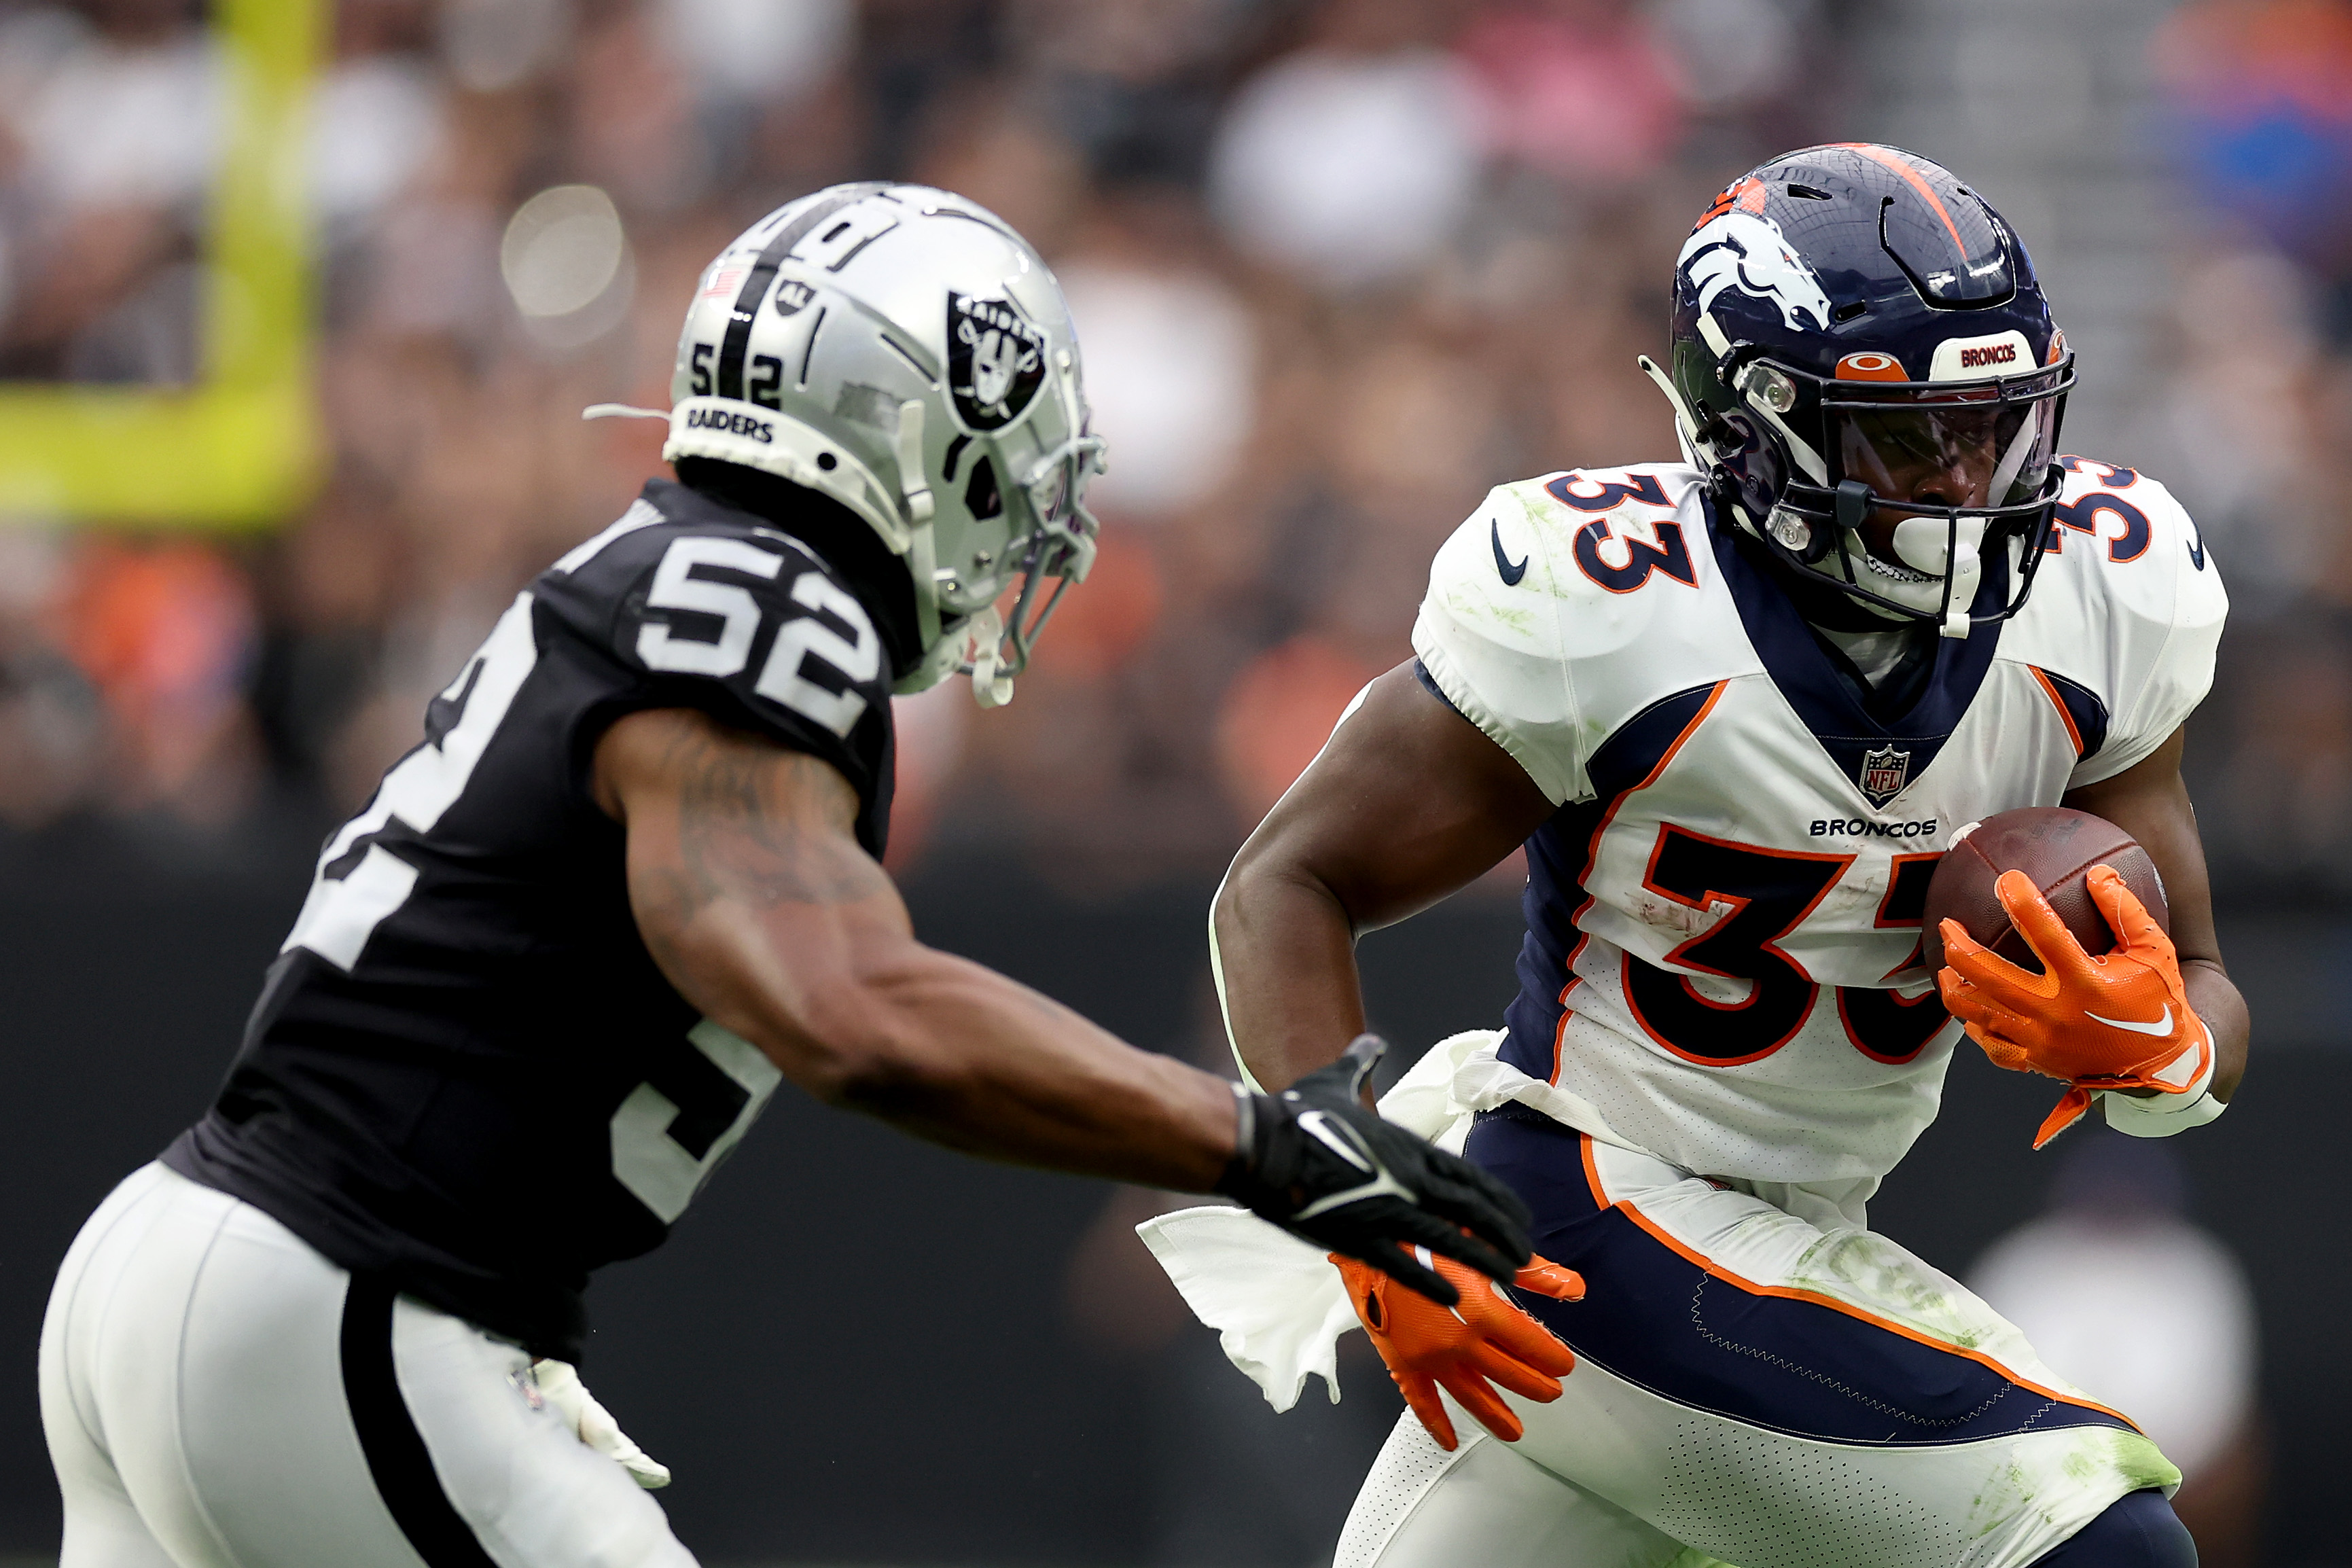 Javonte Williams #33 of the Denver Broncos runs with the ball while being chased by Denzel Perryman #52 of the Las Vegas Raiders in the second quarter at Allegiant Stadium on October 02, 2022 in Las Vegas, Nevada.